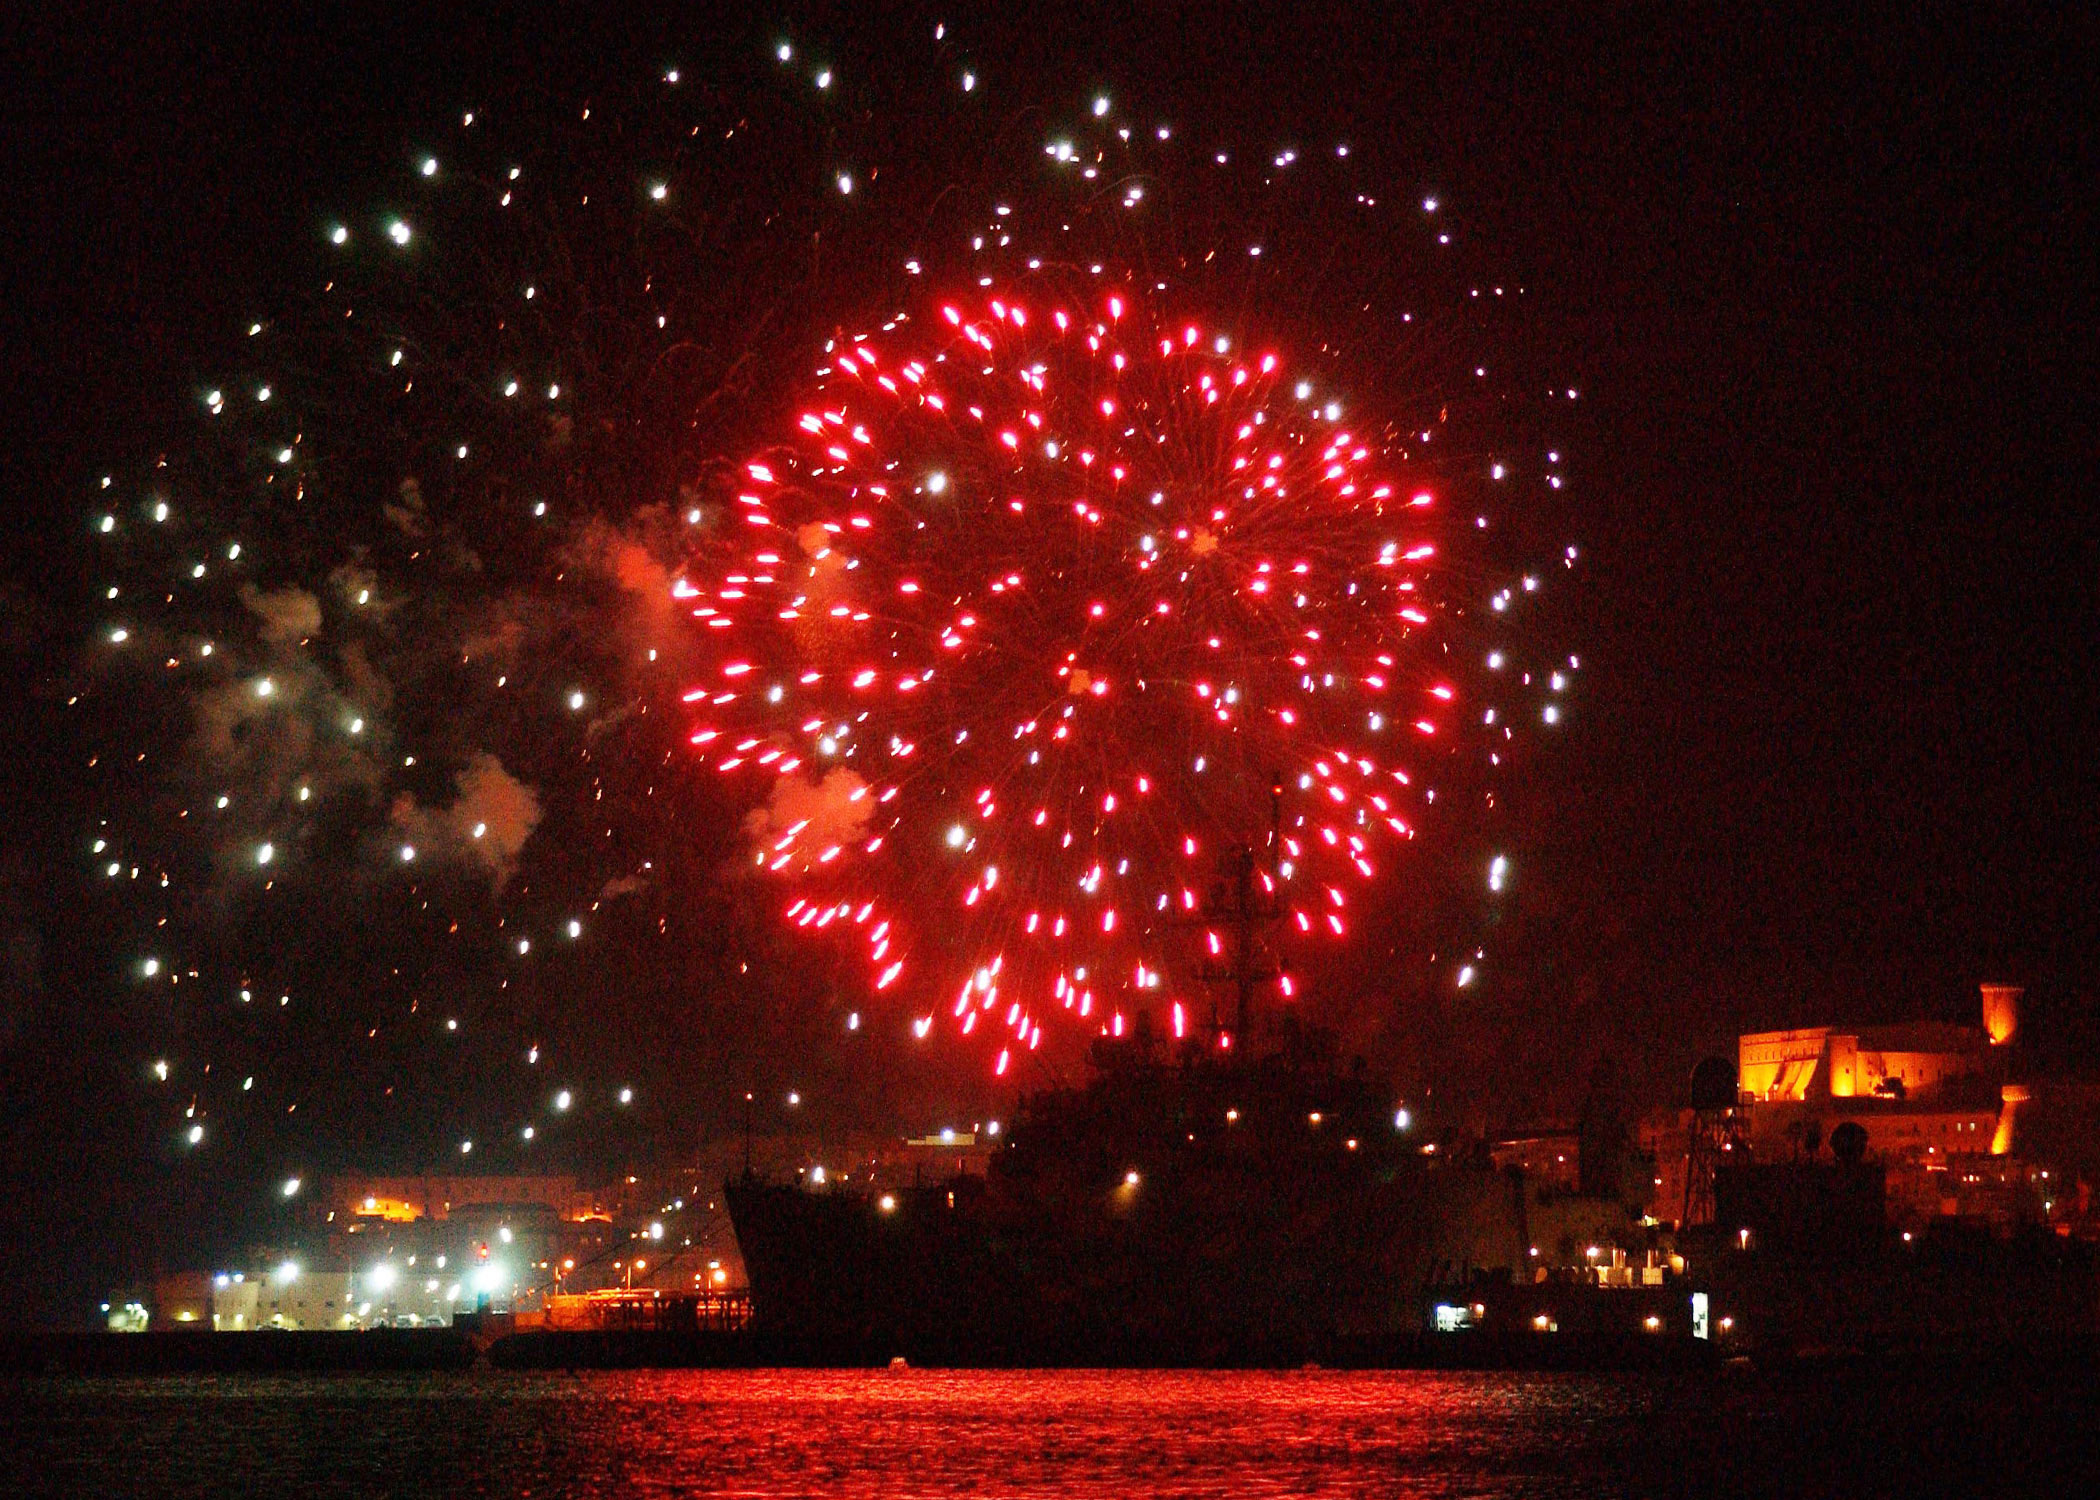 Sailors from the Sixth Fleet staff, USS La Salle (AGF-3), Naval Support Activity Gaeta, their dependants, and local Italian nationals enjoy a Independence Day July 4th fireworks display in 2003. US Navy Photo